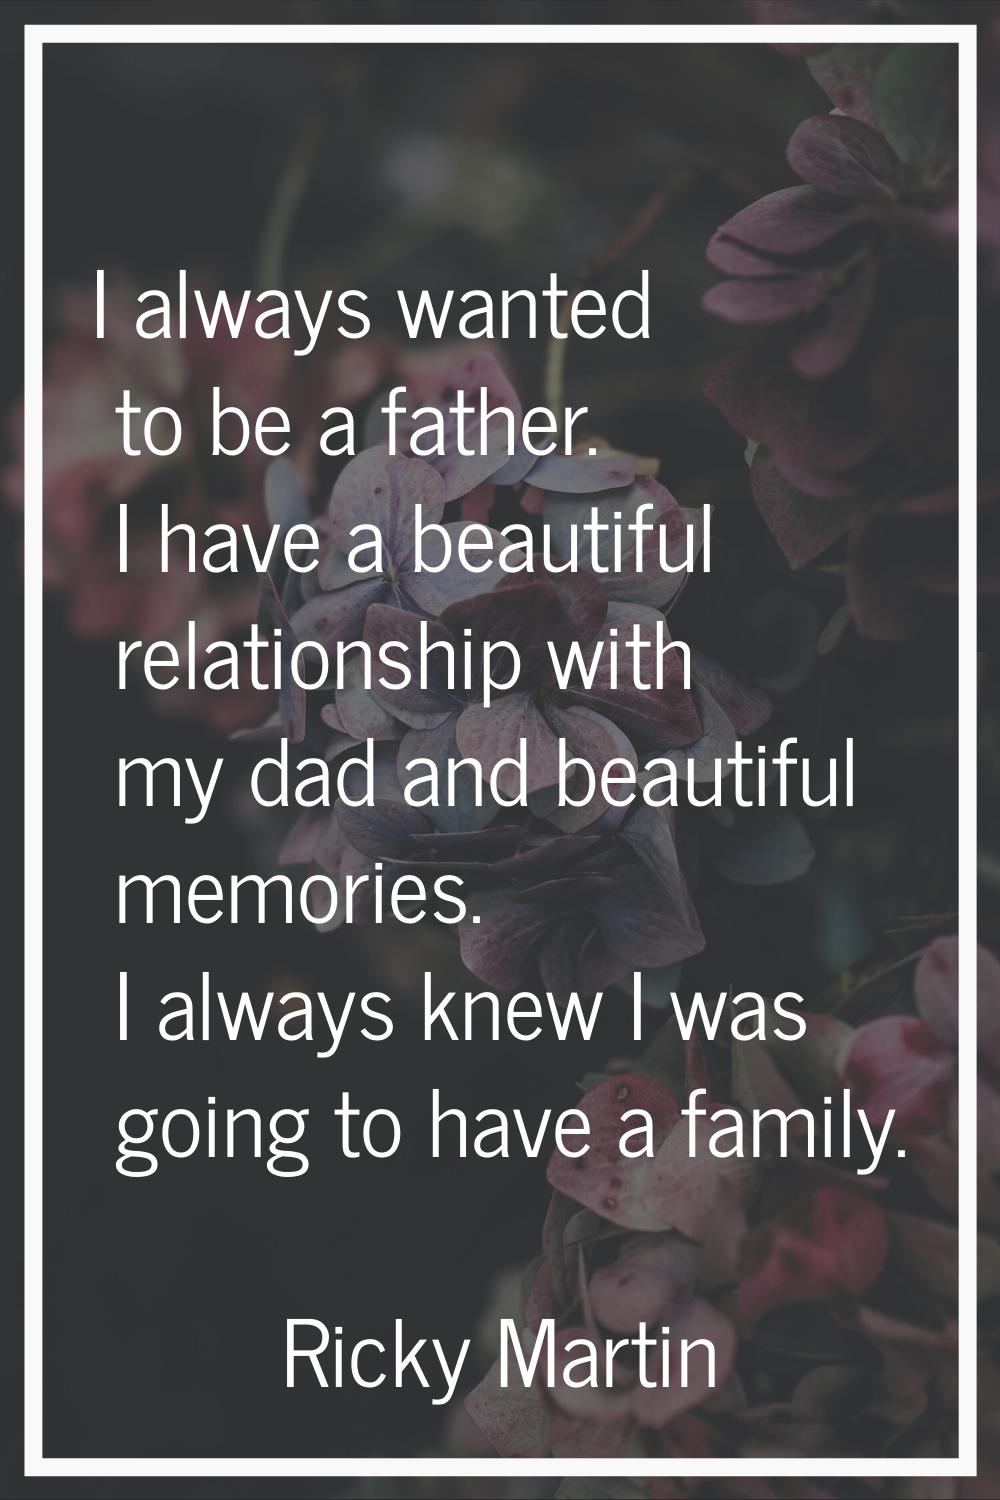 I always wanted to be a father. I have a beautiful relationship with my dad and beautiful memories.